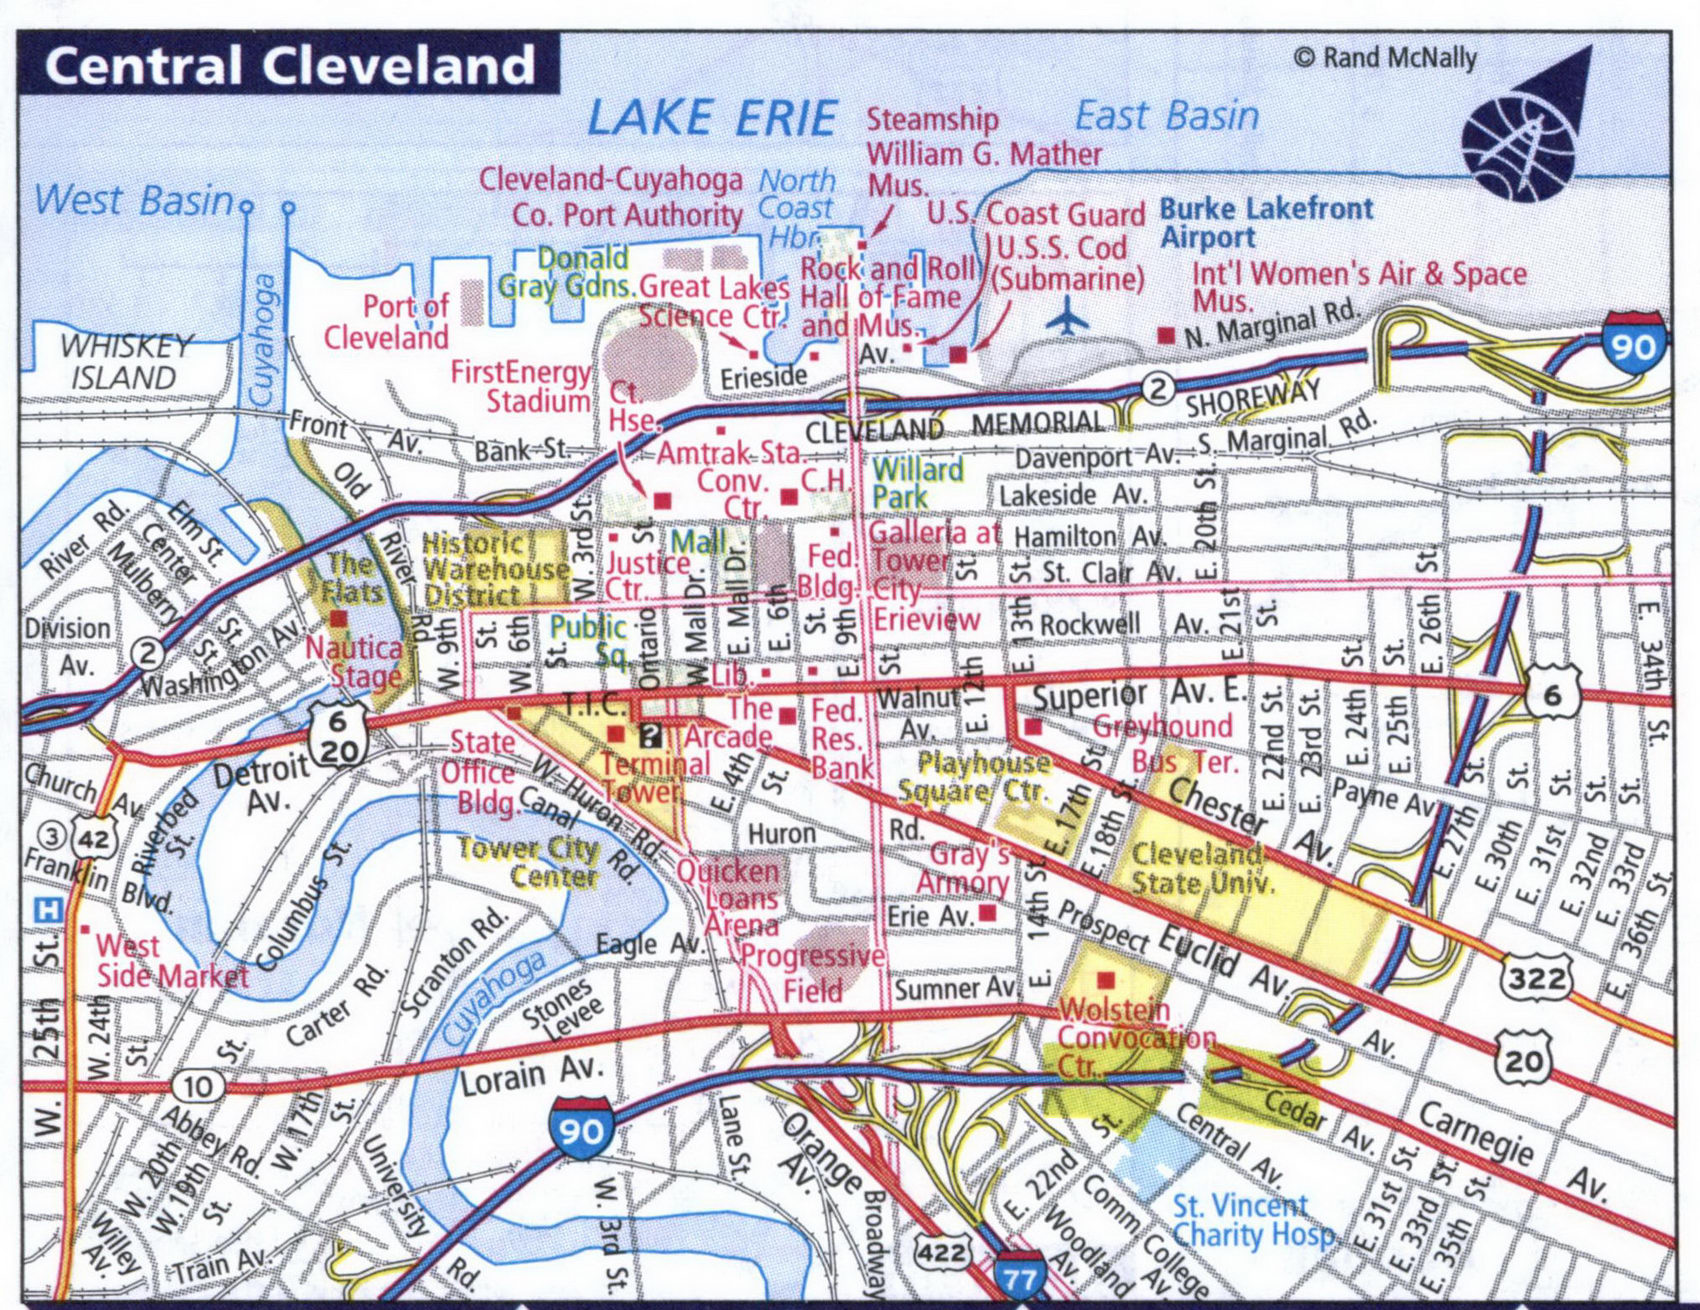 Map of Central Cleveland city